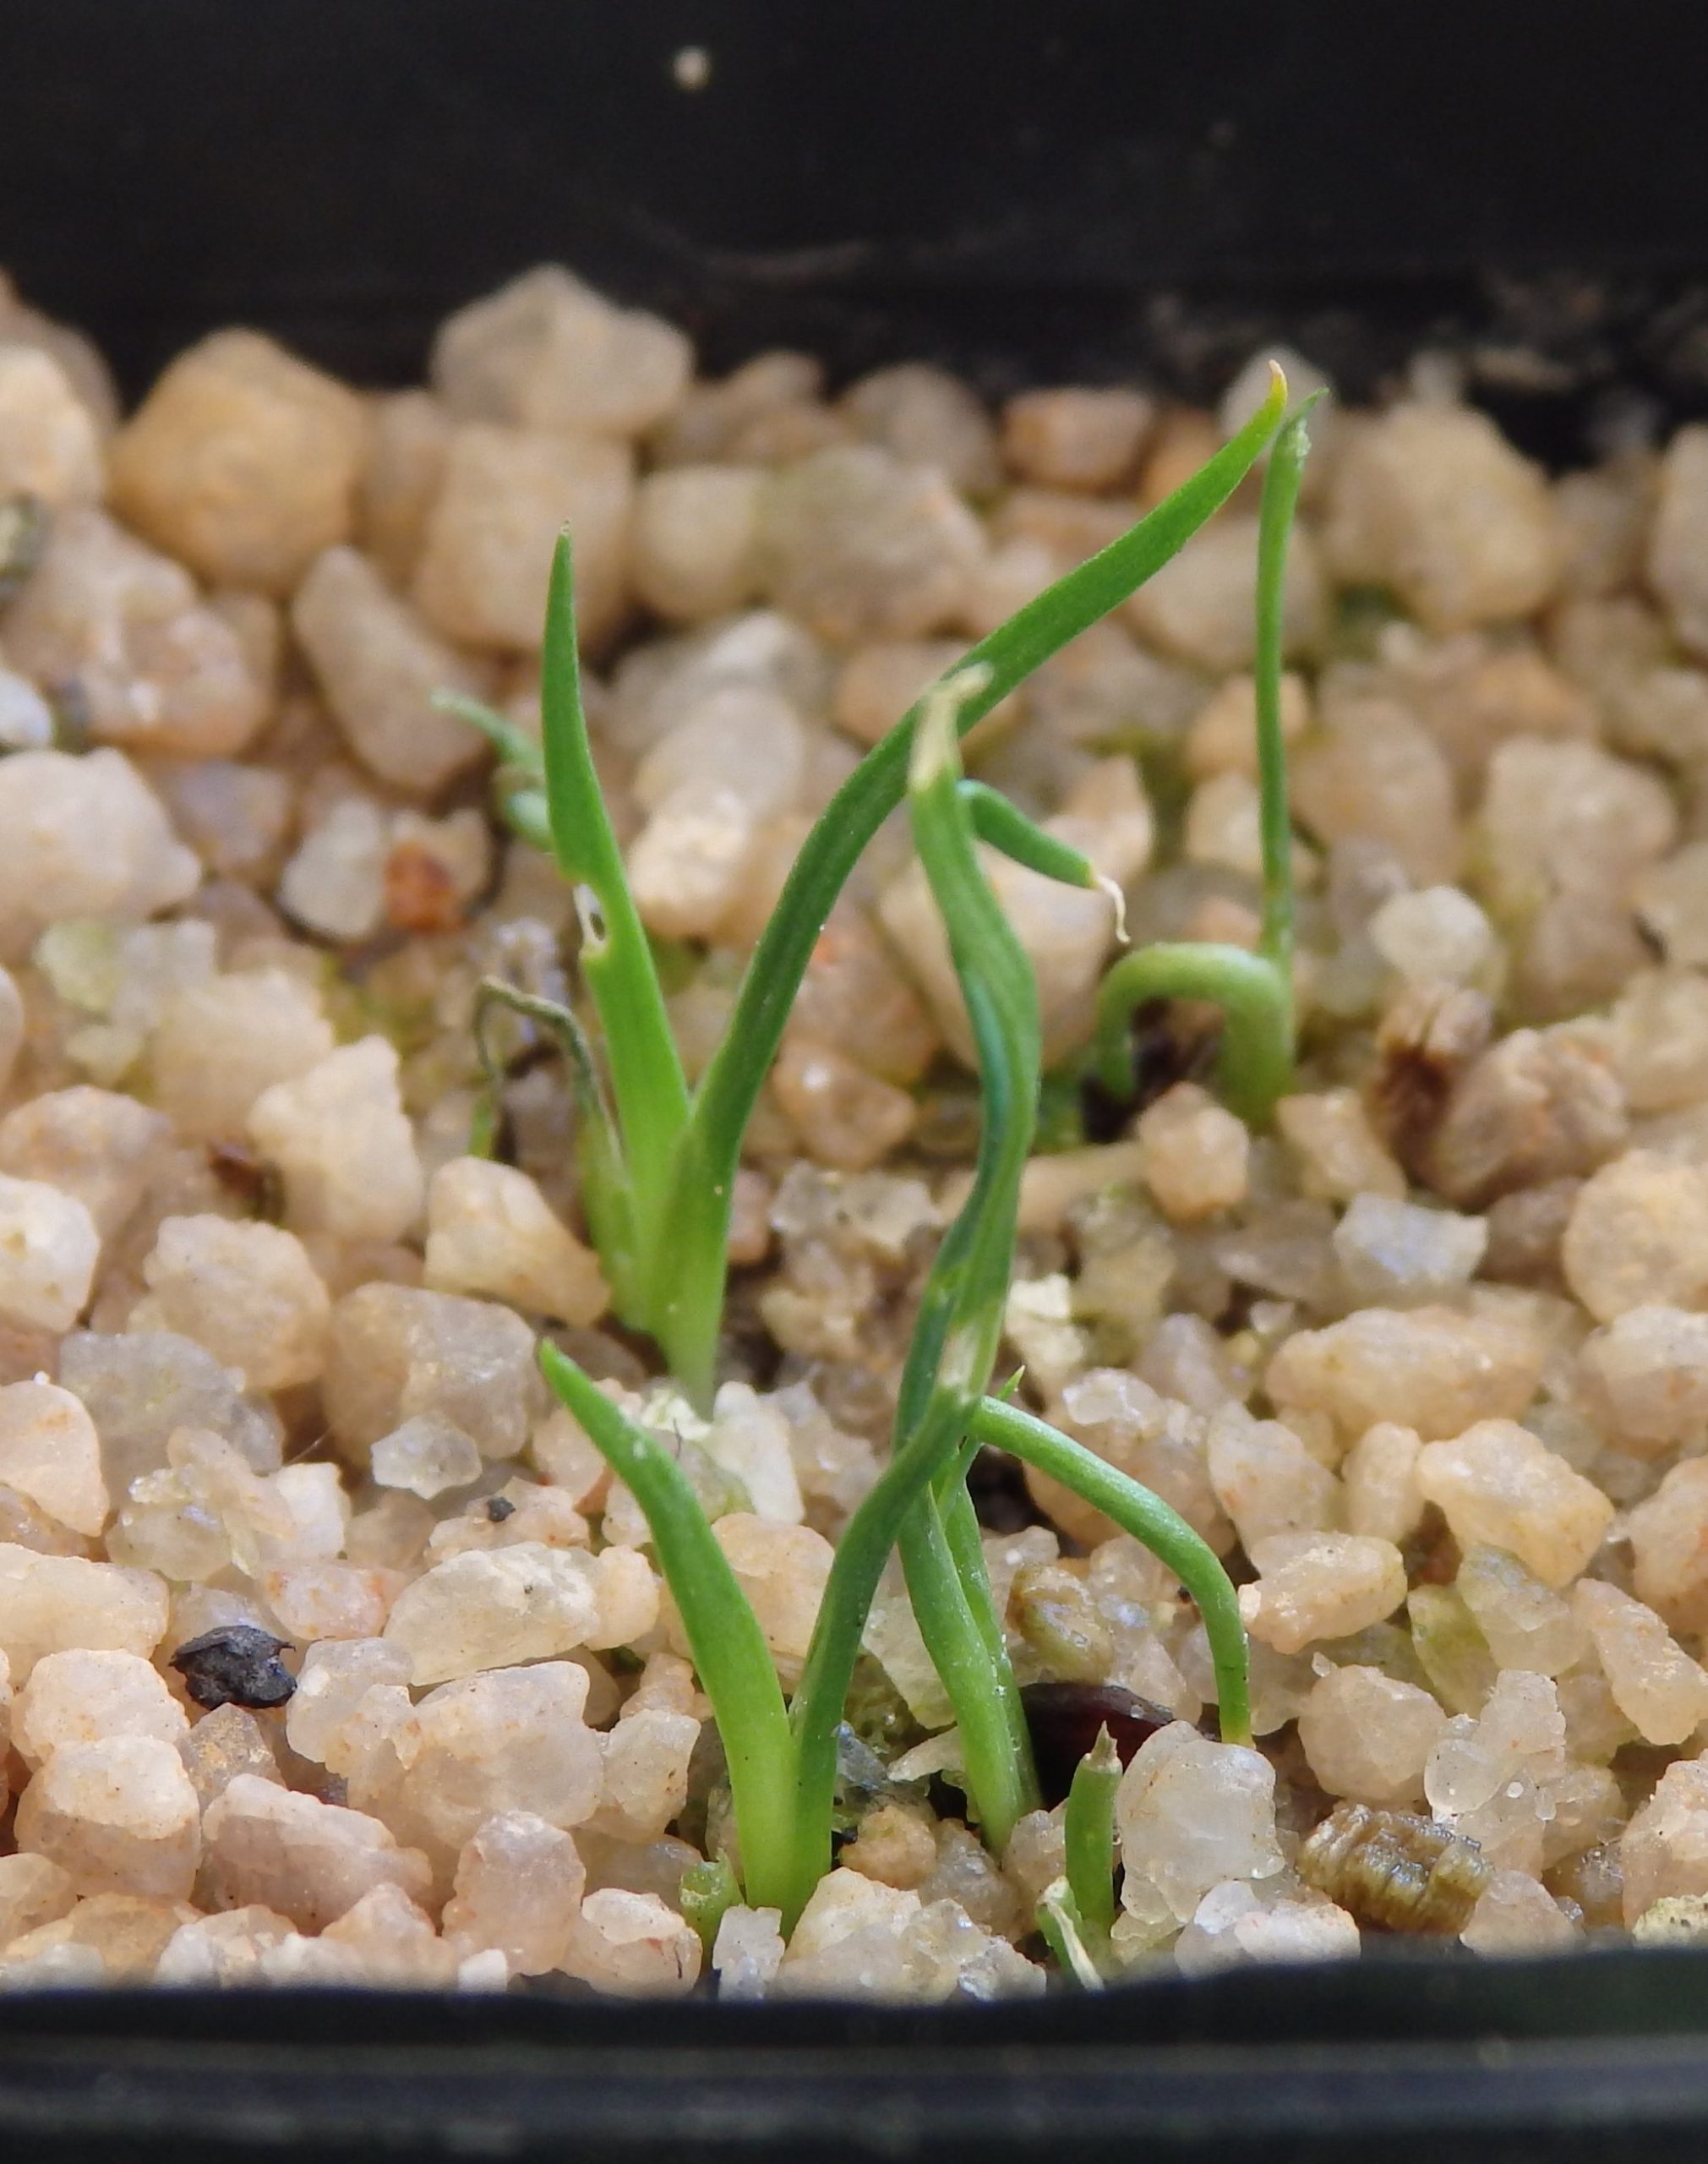 Diplarrena Moraea (Butterfly Flag) at germination, 82 days after sowing.